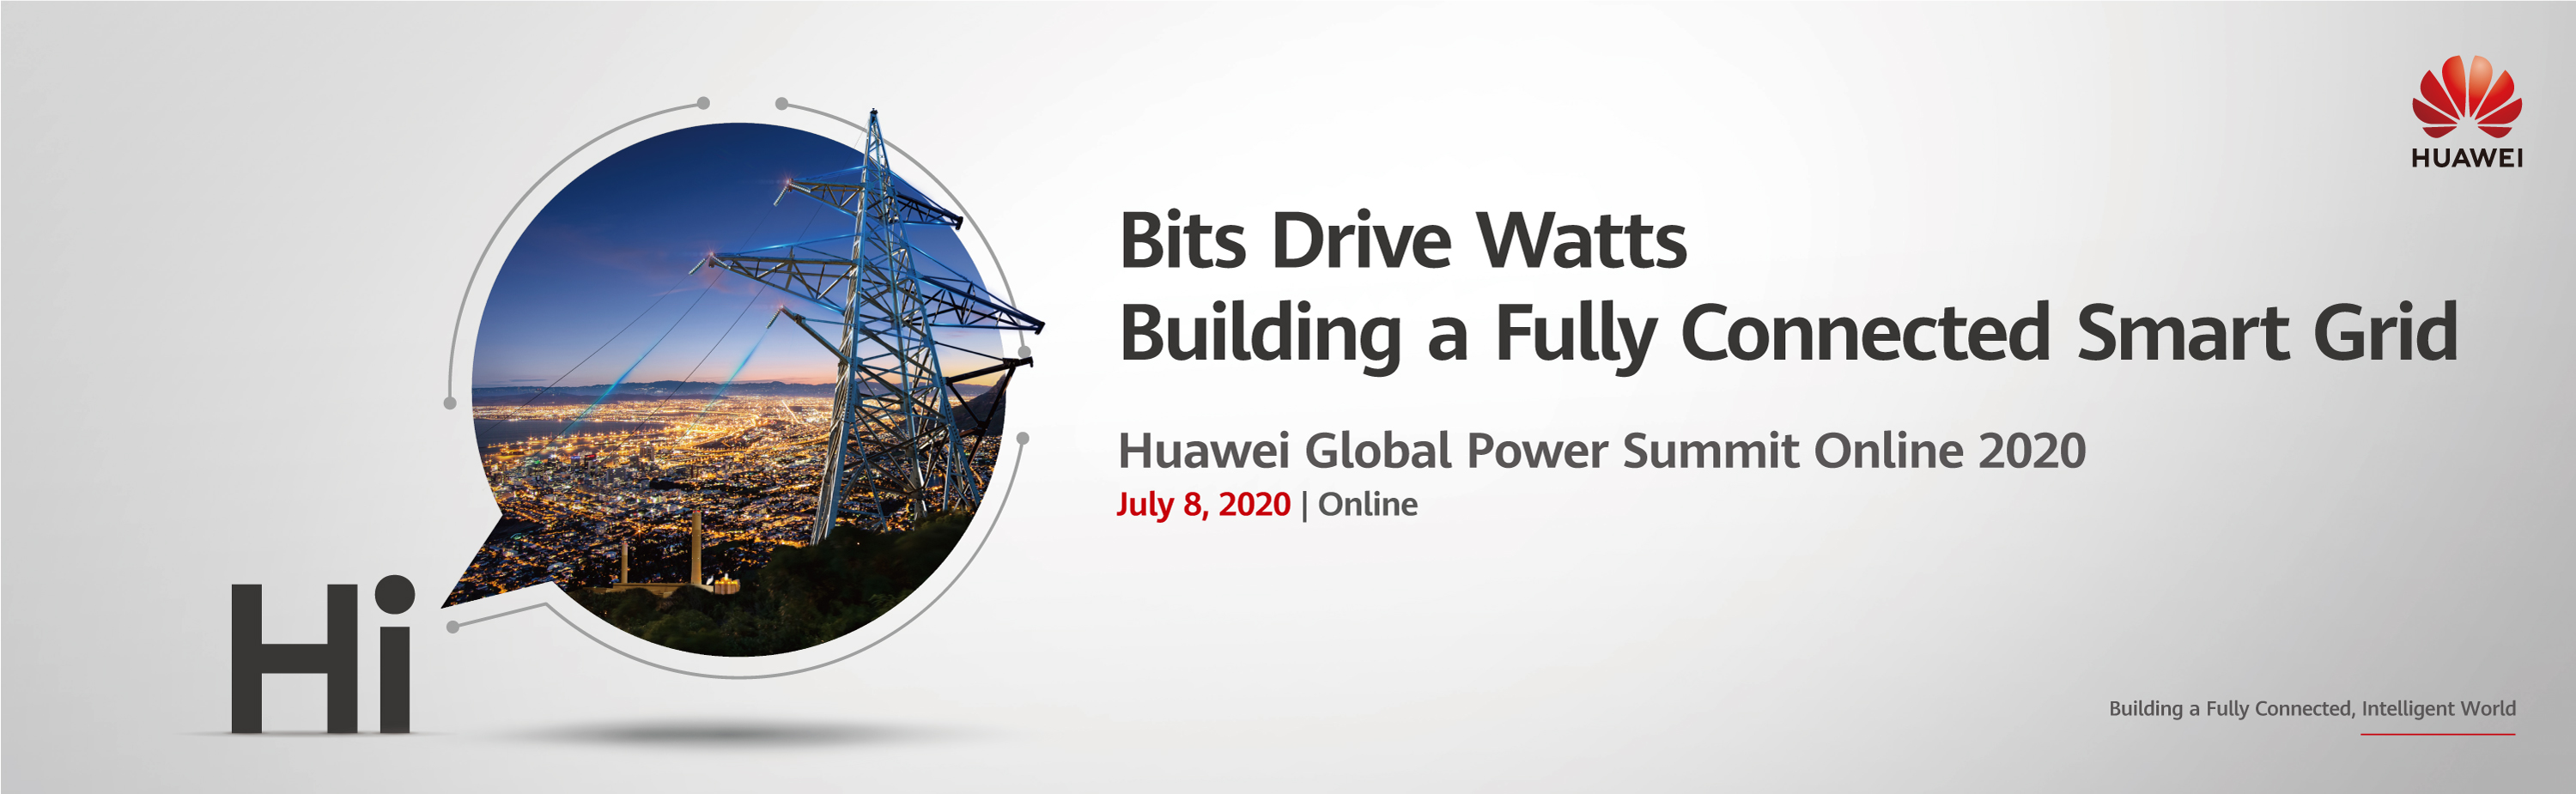 Banner for Huawei's Global Power Summit Online 2020, including the KV depicting a cityscape at dusk with a pylon prominent